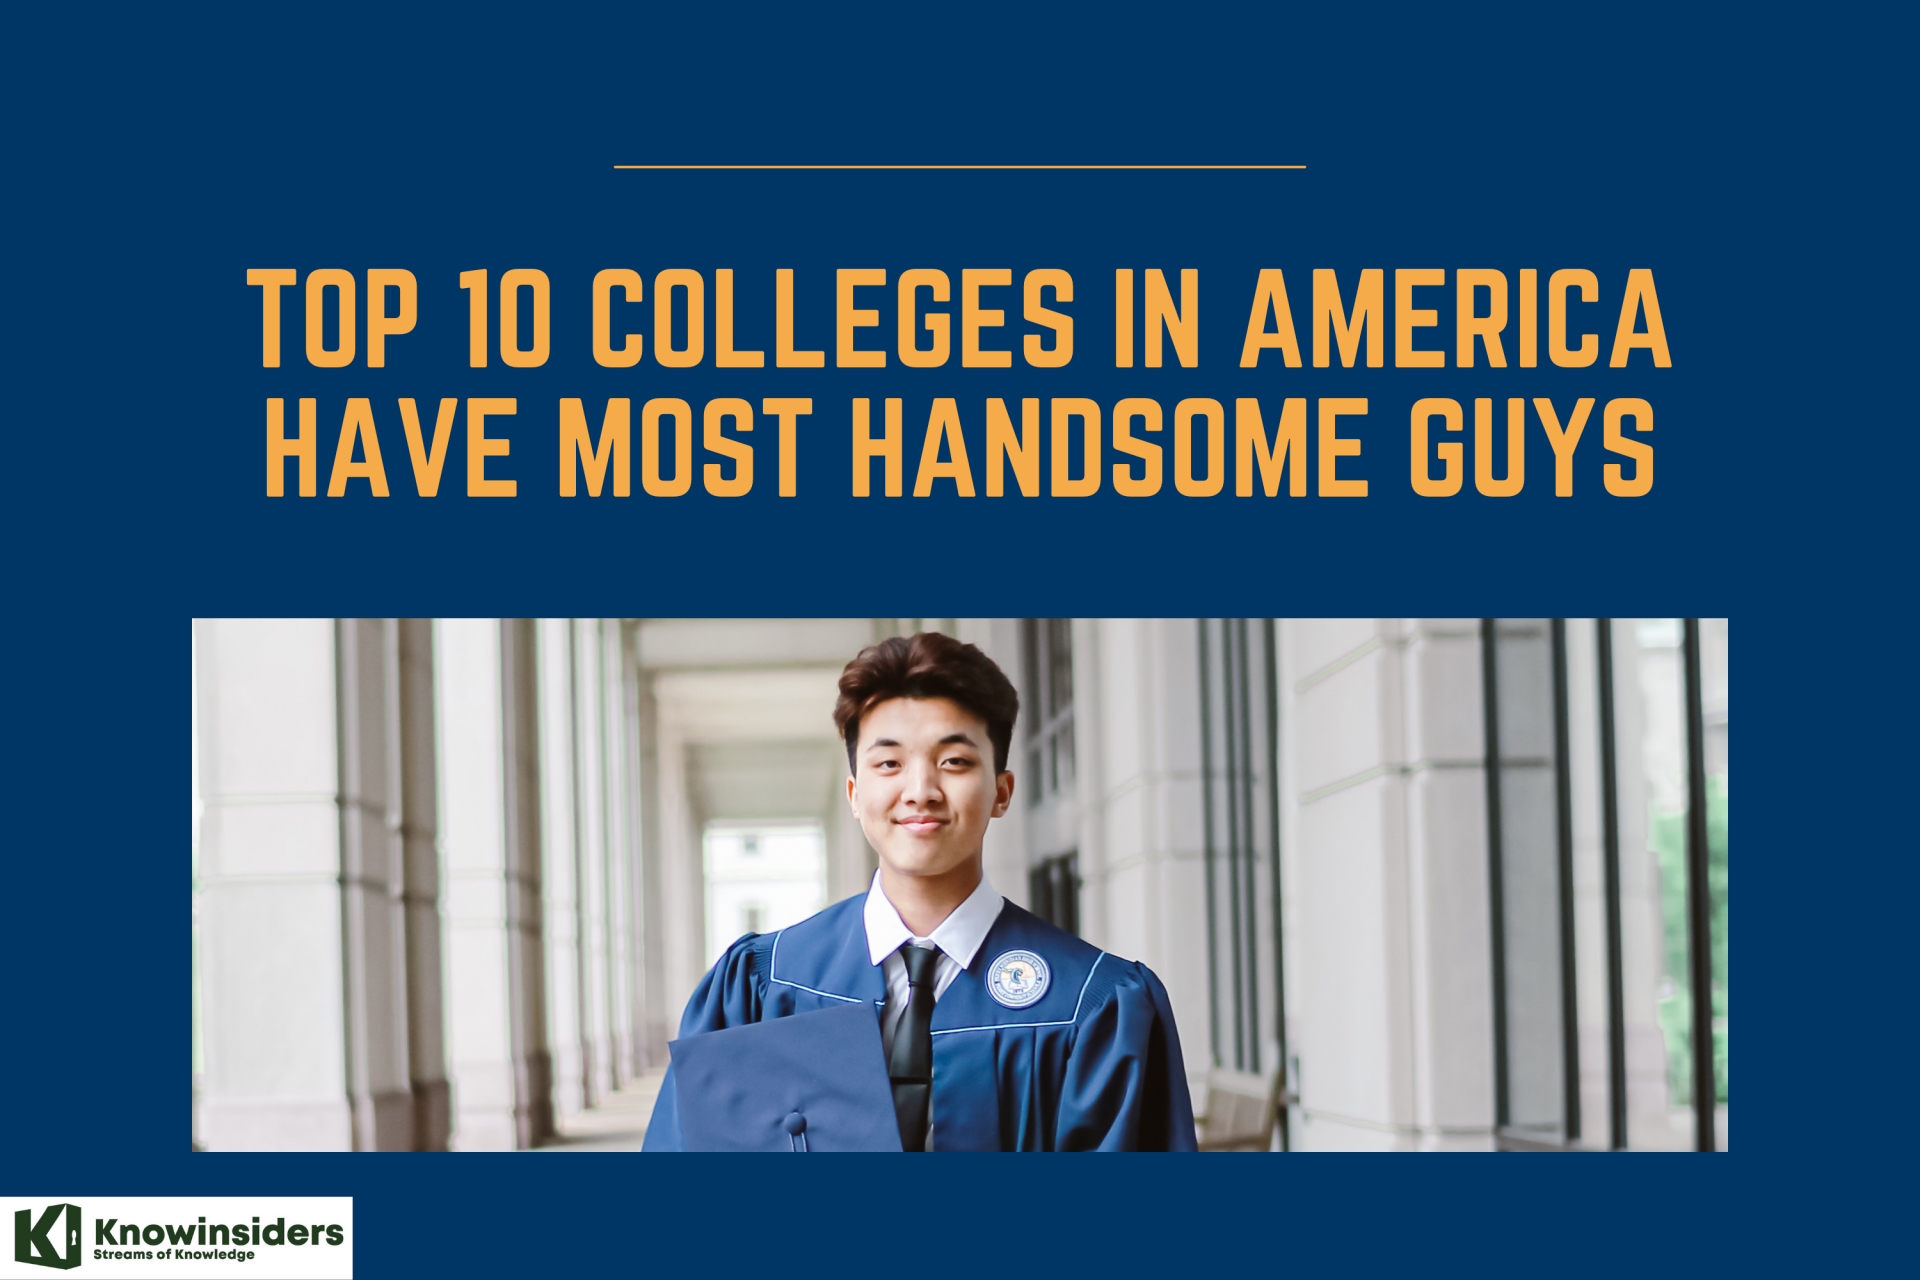 Top 10 Colleges in America Have Most Handsome Guys